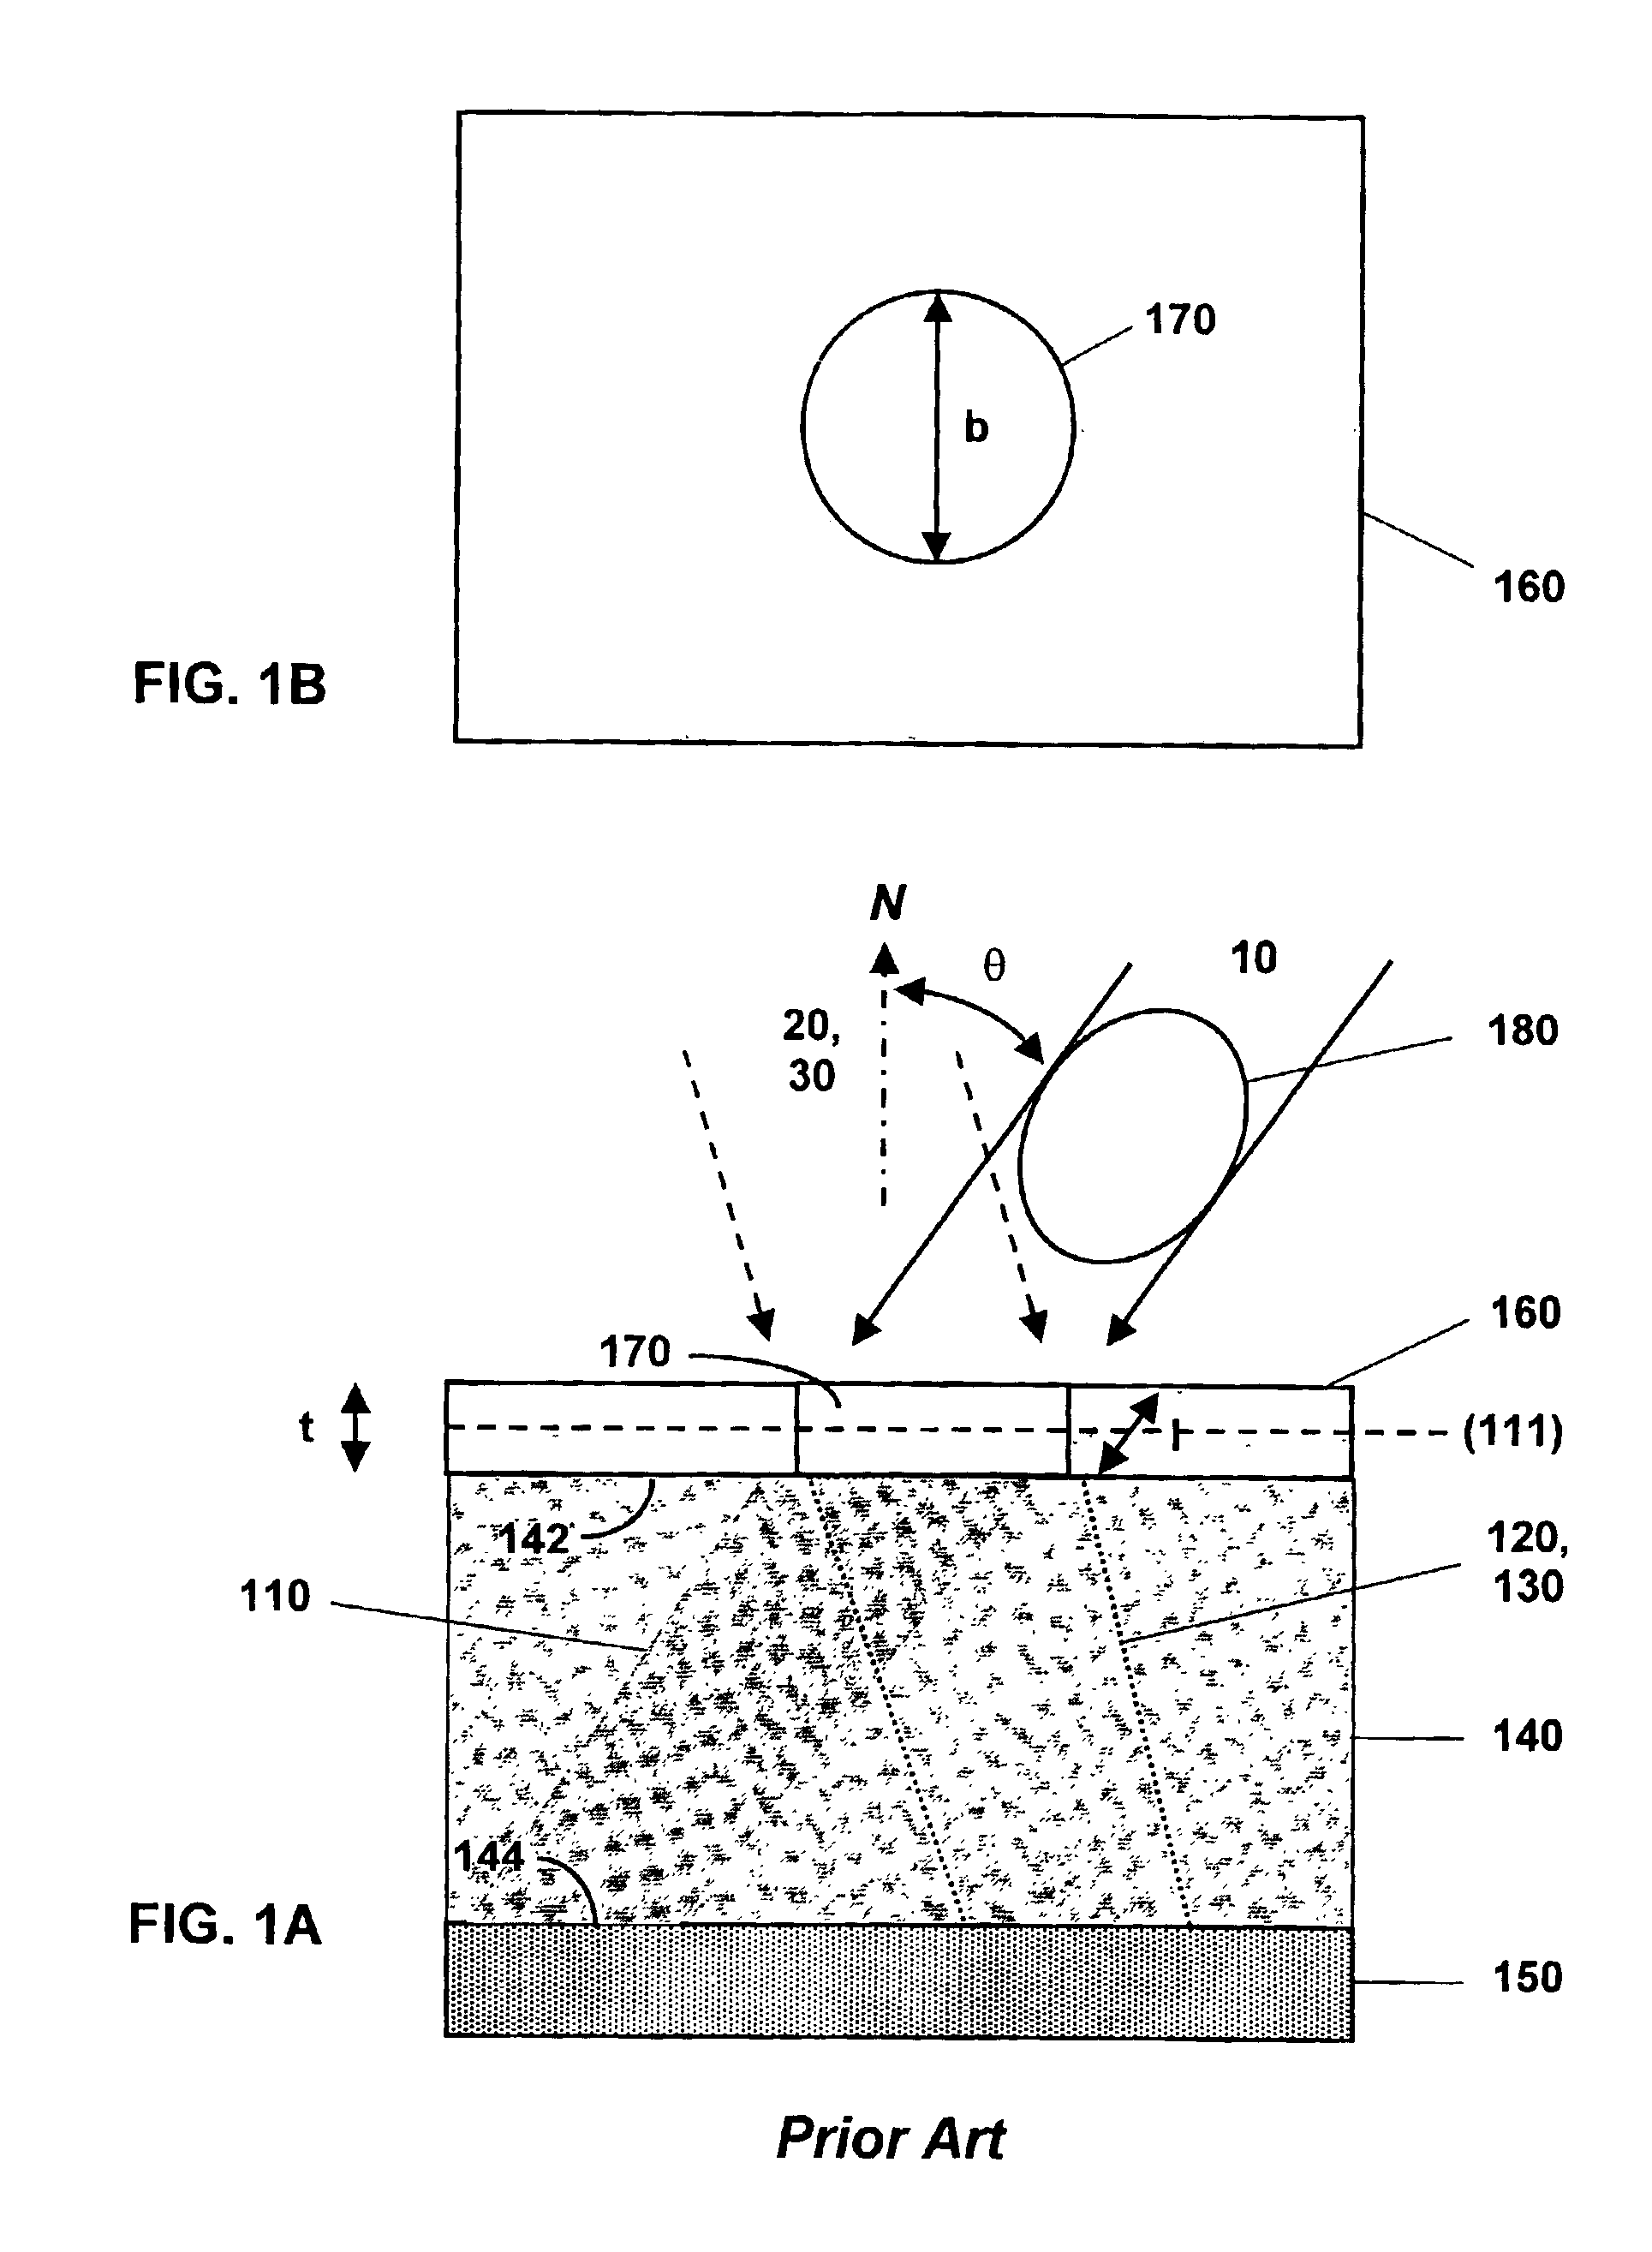 Method for the fabrication of three-dimensional microstructures by deep X-ray lithography